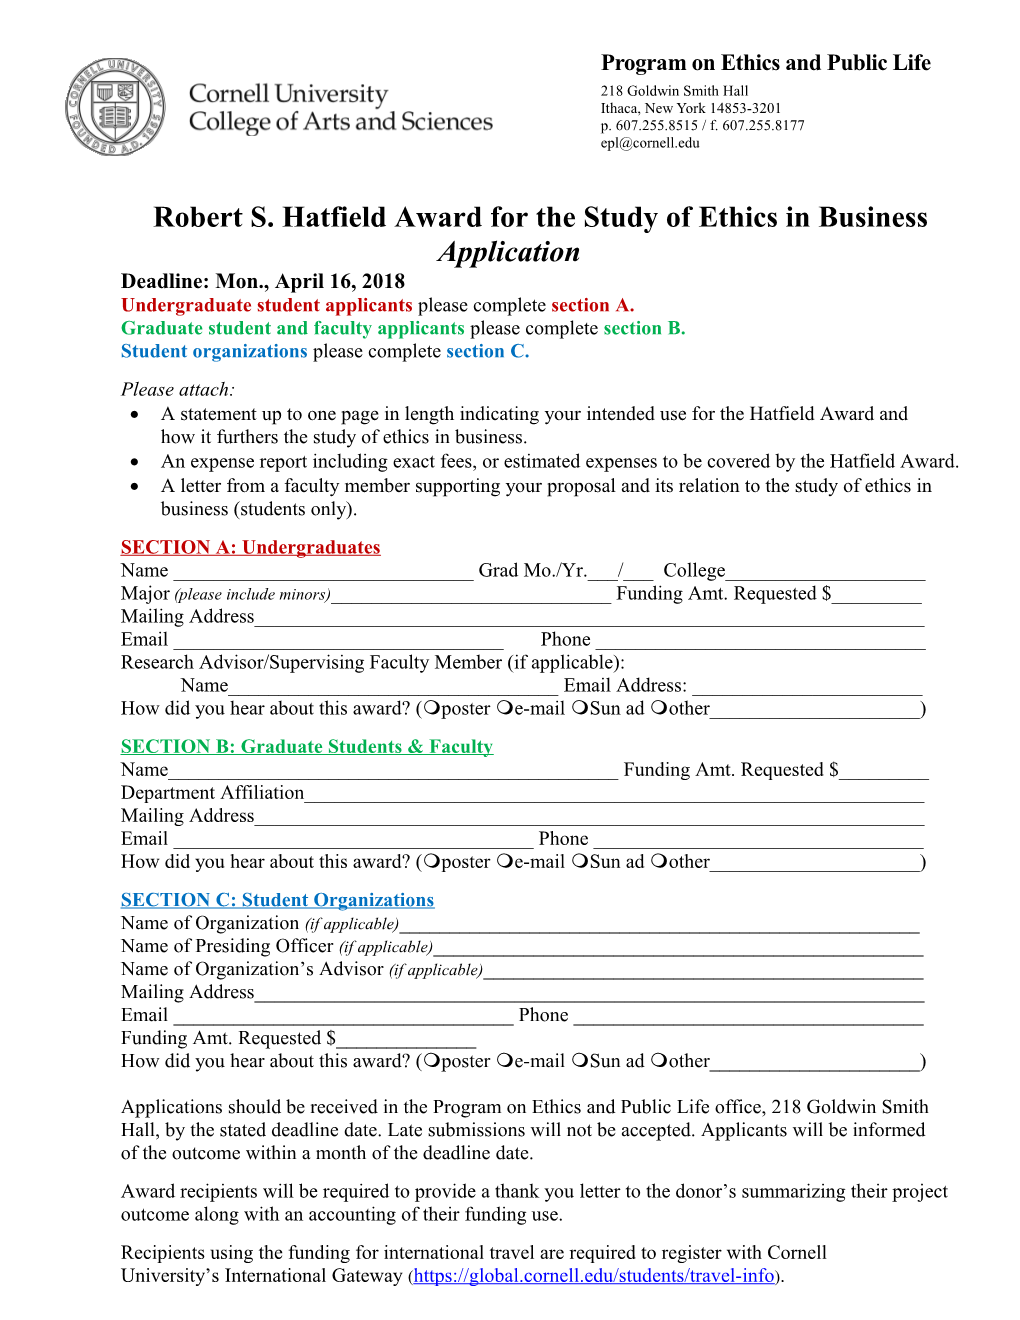 Robert S. Hatfield Award for the Study of Ethics in Business